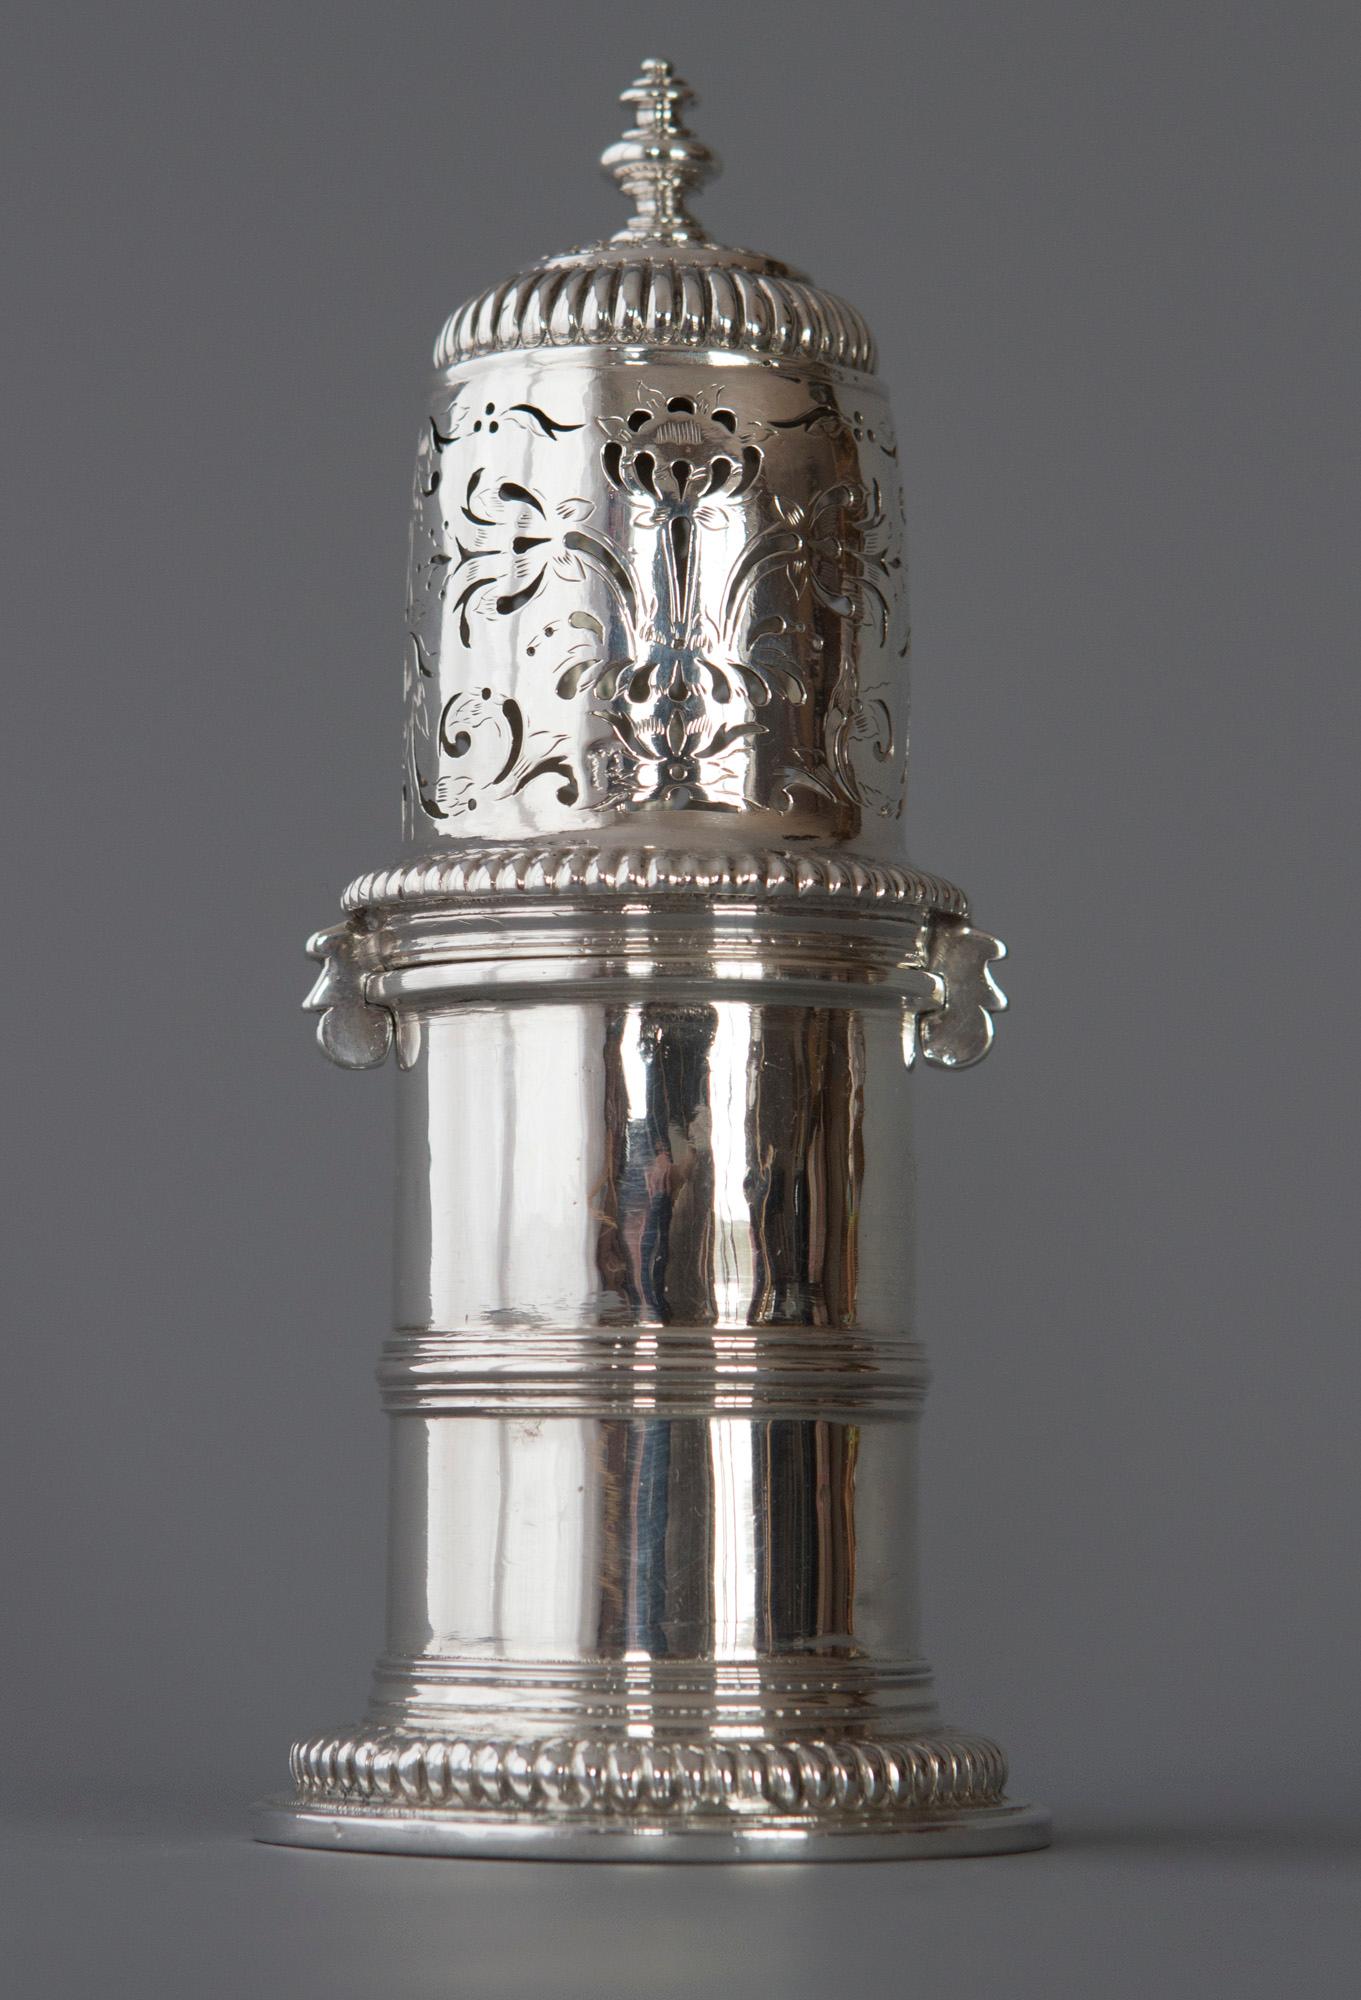 A very rare William III Britannia silver lighthouse caster, London 1698. Britannia Standard, with a turned finial to the domed, pierced cover engraved with scrolls and flowers with bayonet fixing mounts. The main body of the caster is plain with